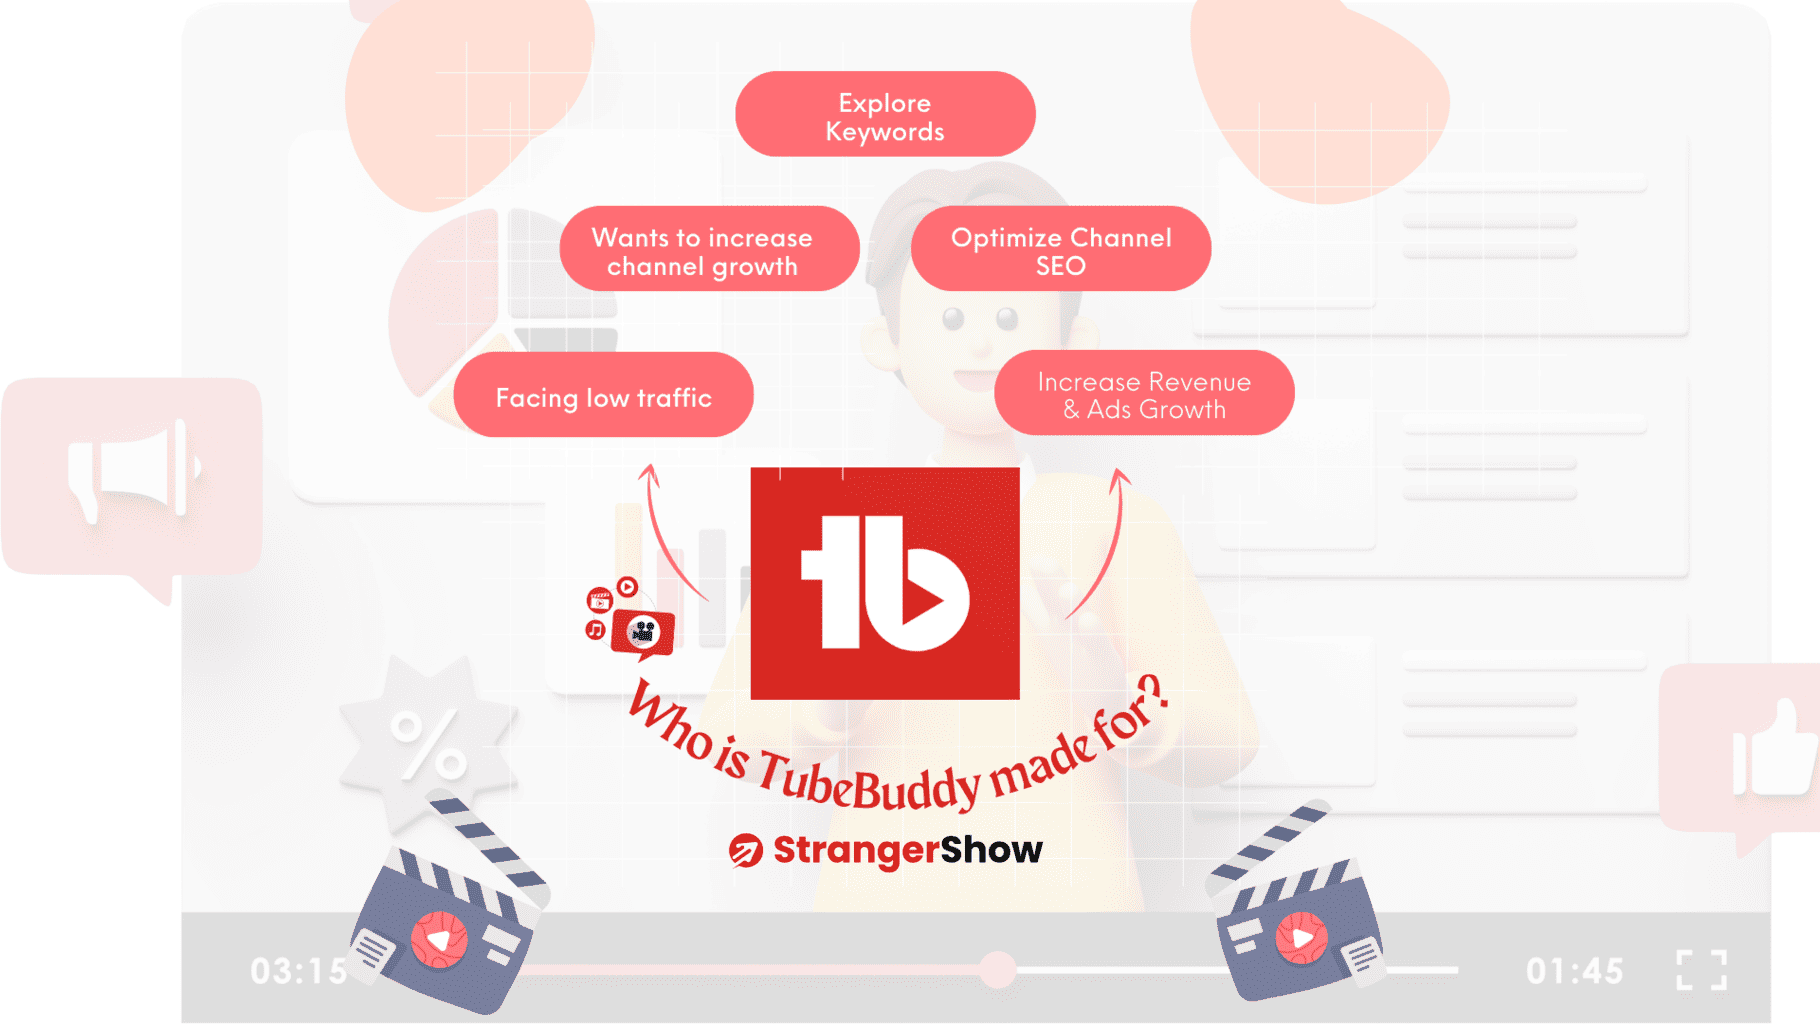 Who is TubeBuddy made for